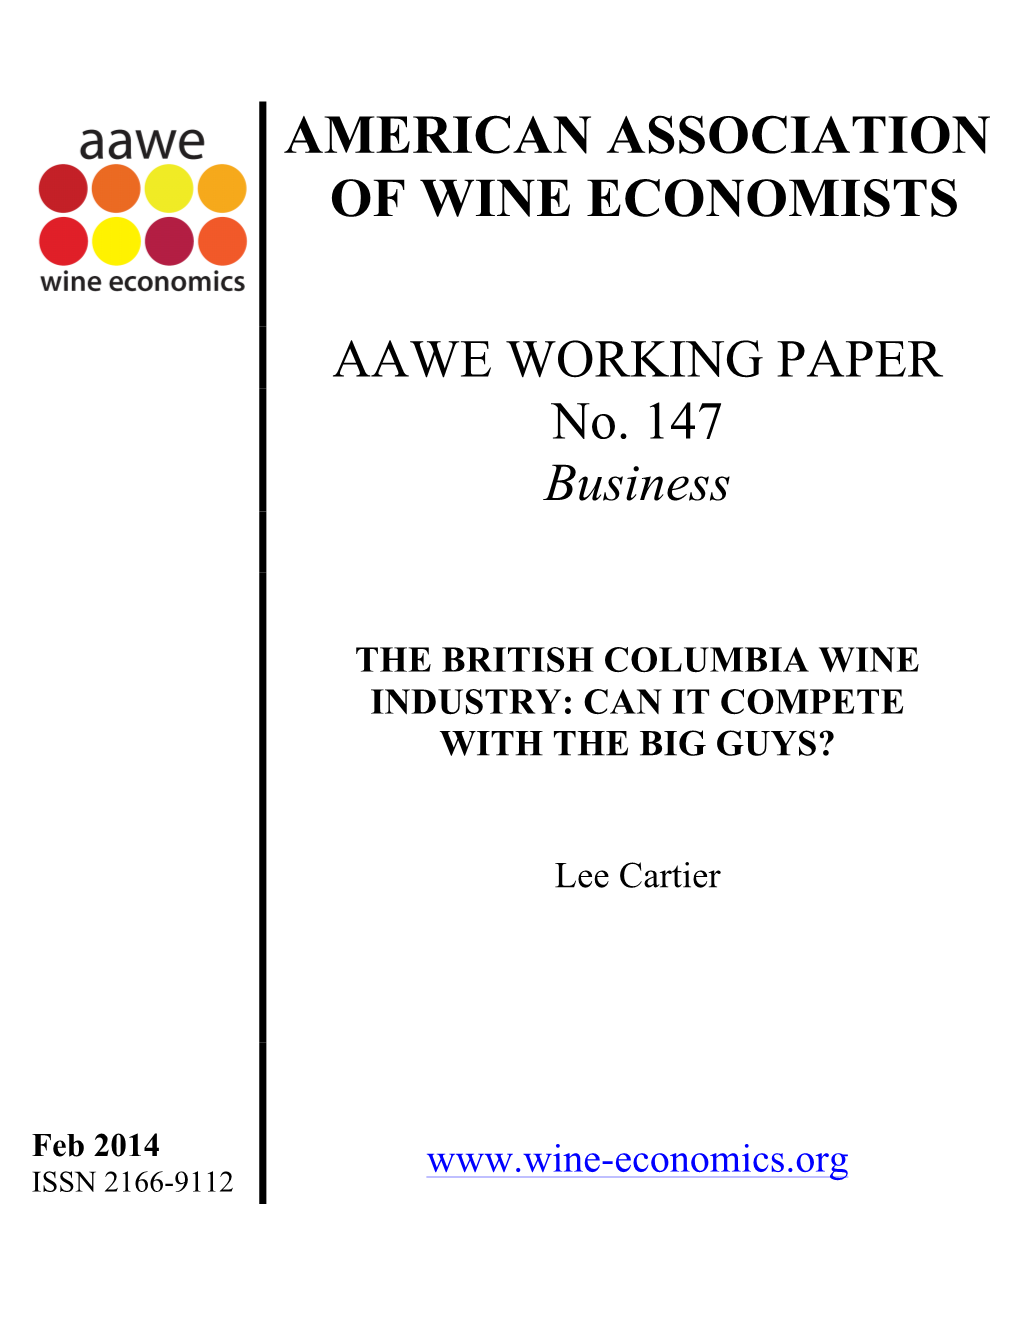 The British Columbia Wine Industry: Can It Compete with the Big Guys?